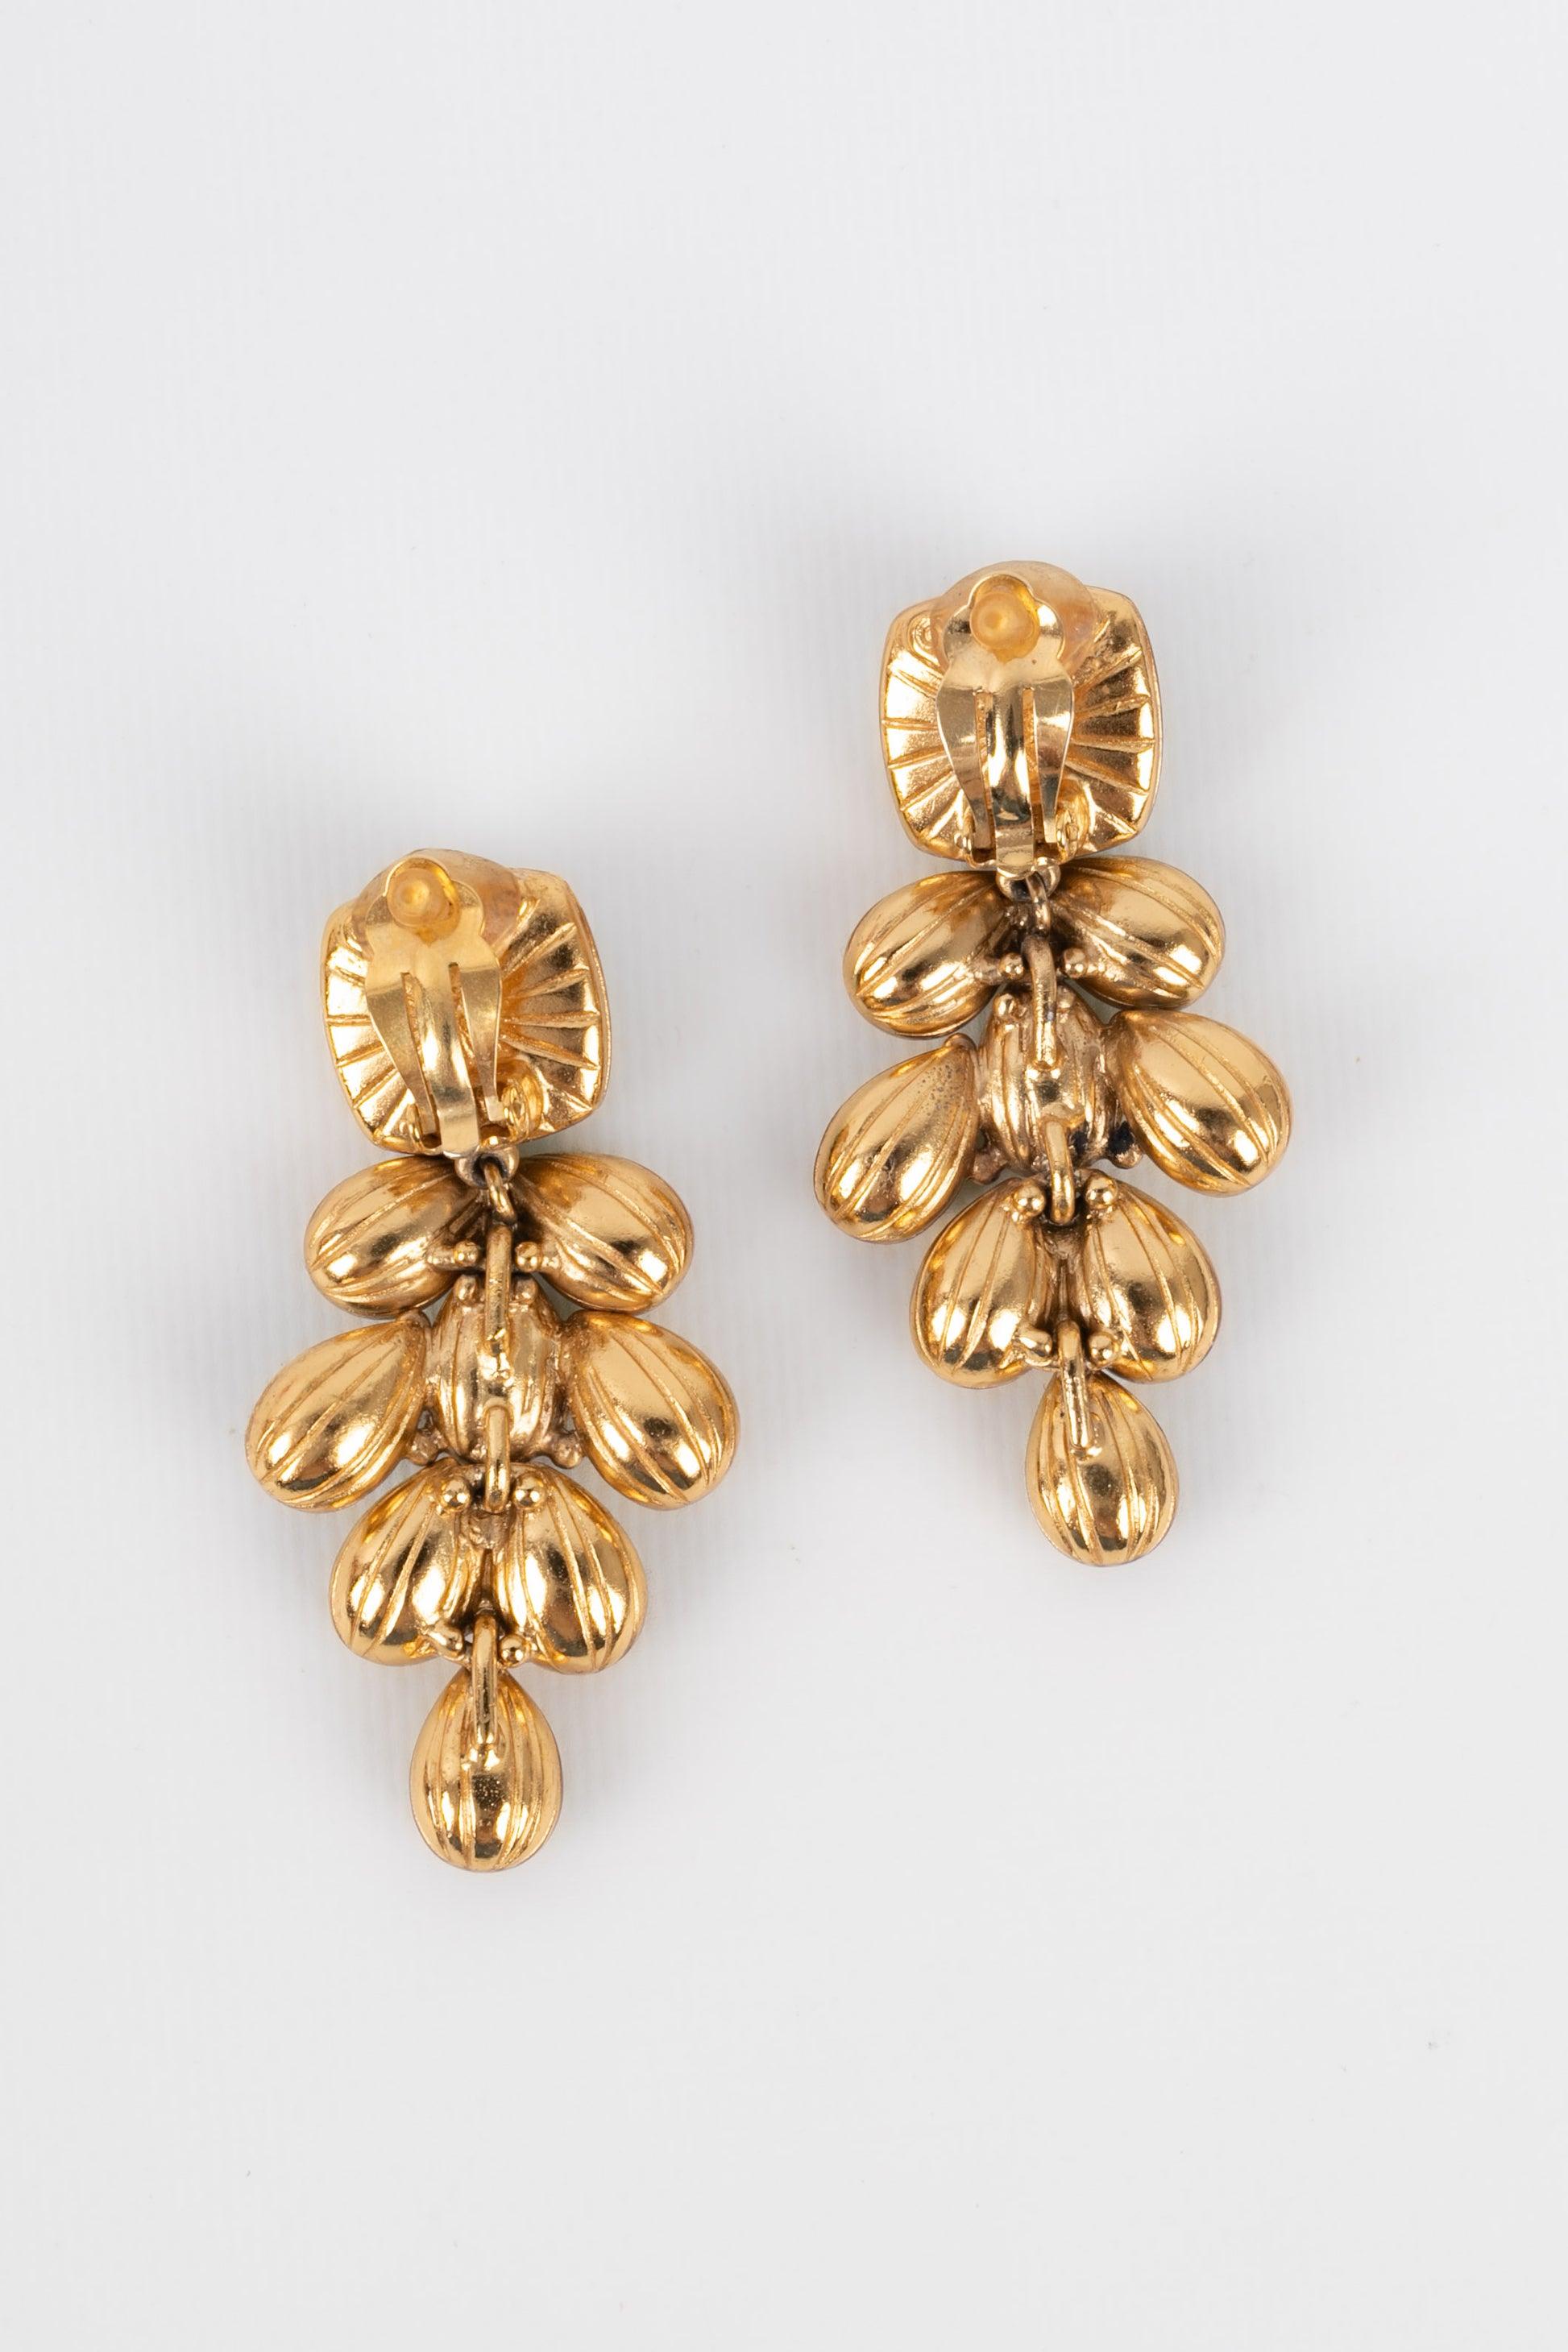 Goossens - Golden metal and resin earrings.

Additional information:
Condition: Very good condition
Dimensions: Length: 7 cm

Seller Reference: BO162